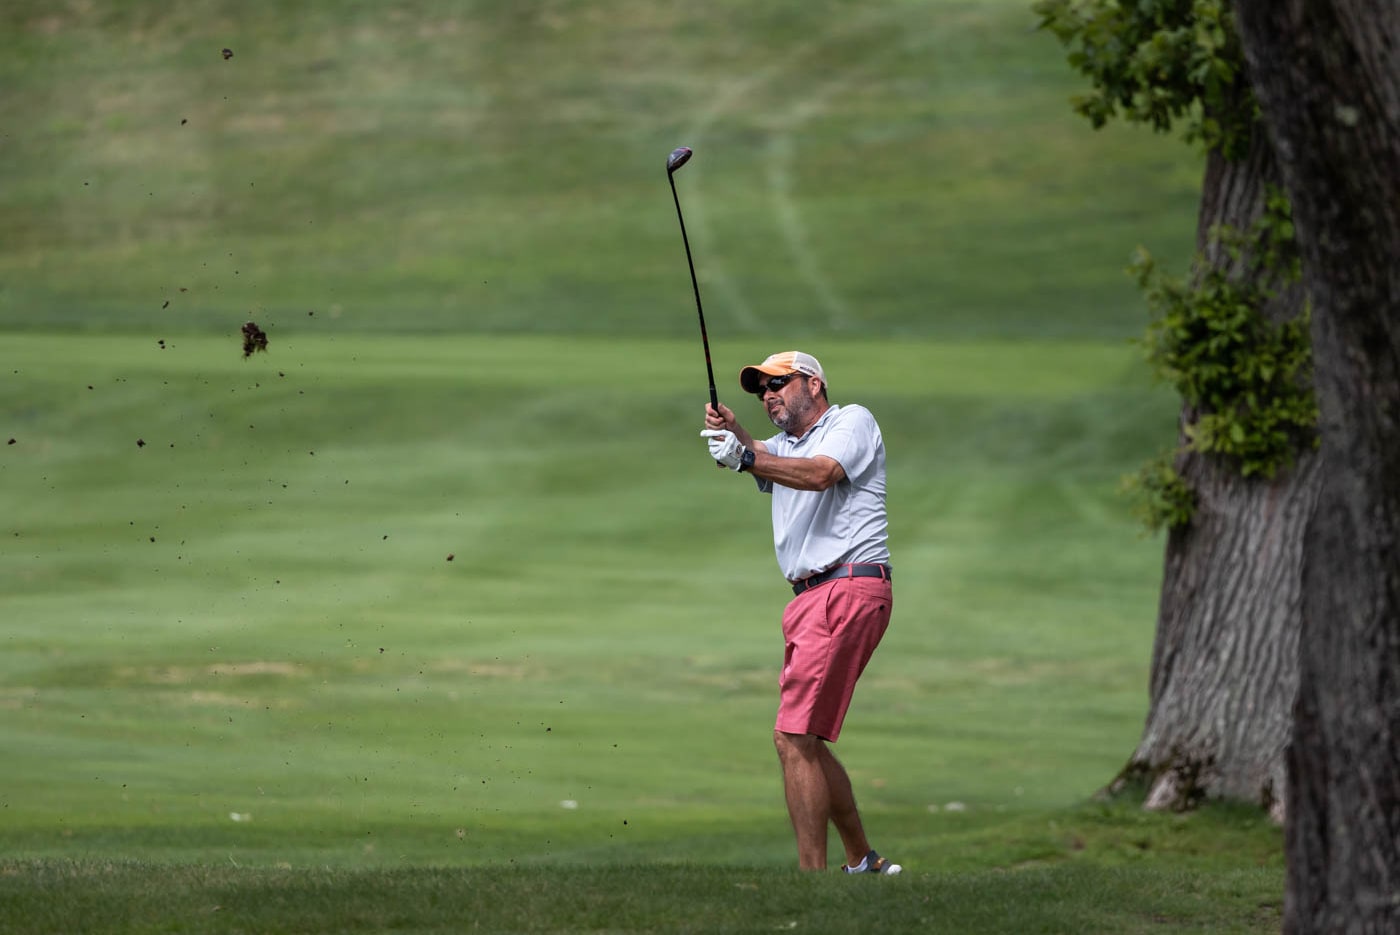 Country-Club-Of-New-Bedford FB-2023-Mens-FB-Gallery August-2023-Country-Club-Of-New-Bedford-FB-2023-Mens-FB-Gallery August-2023-Mens-FB-Gallery-Sunday-Photos-Image-37